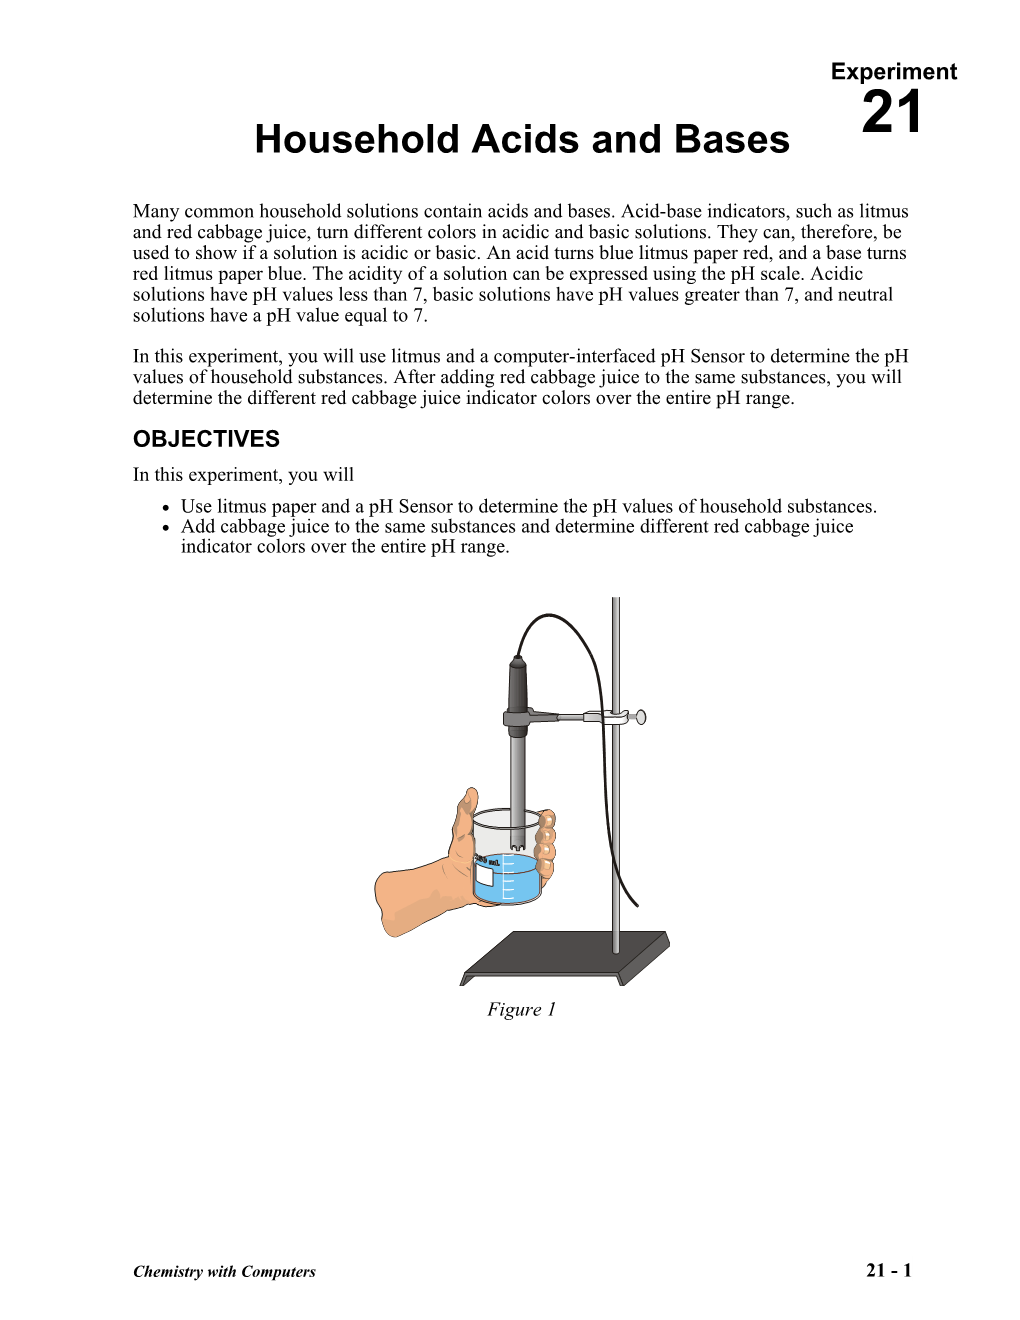 Total Dissolved Solids s14